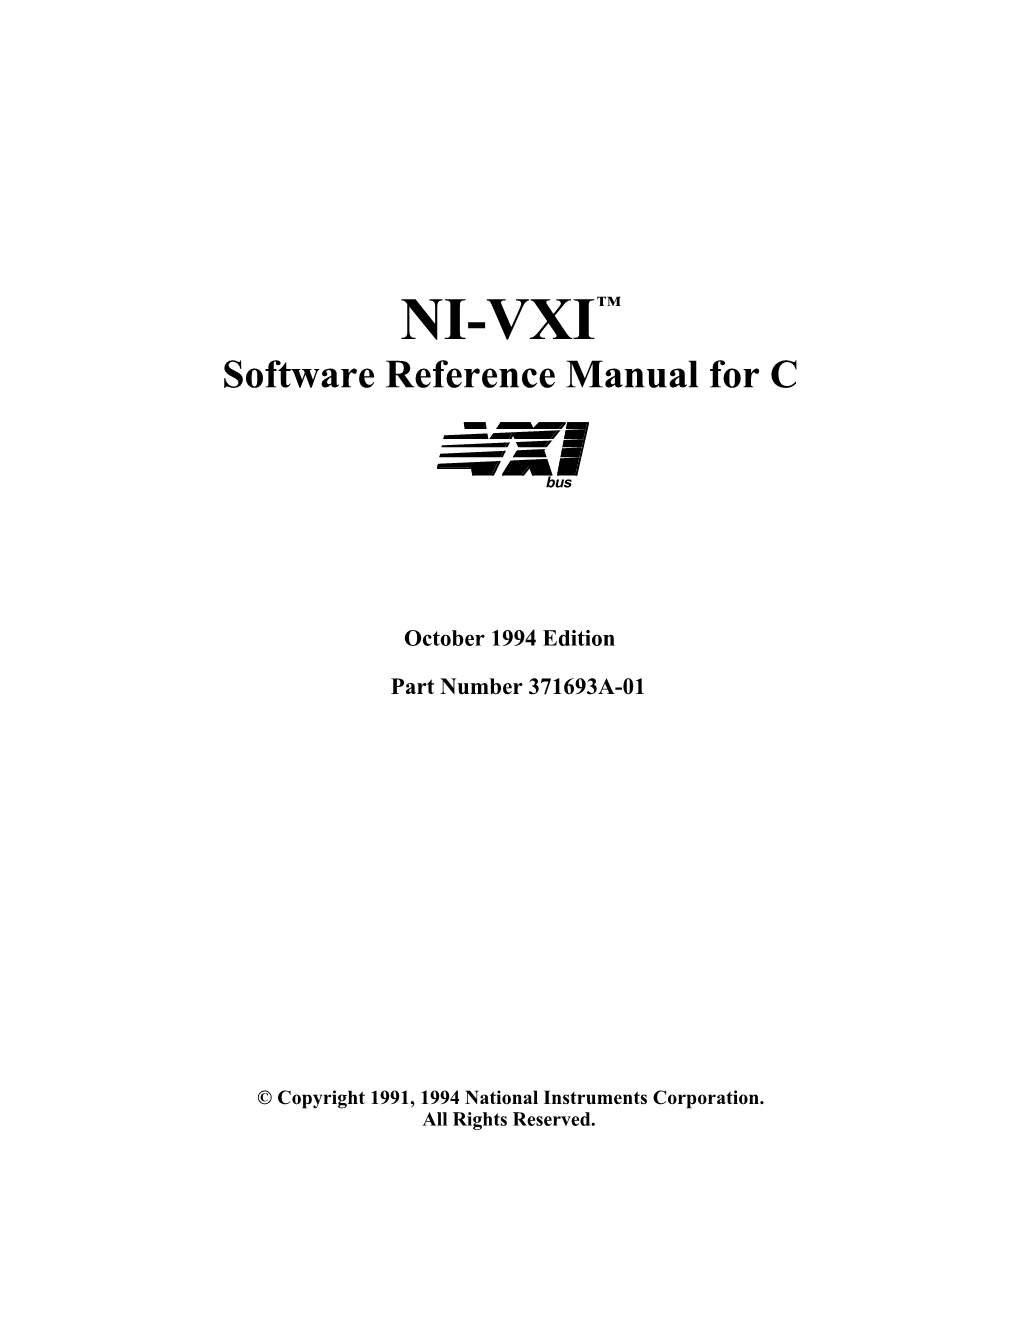 NI-VXI Software Reference Manual for C Contents